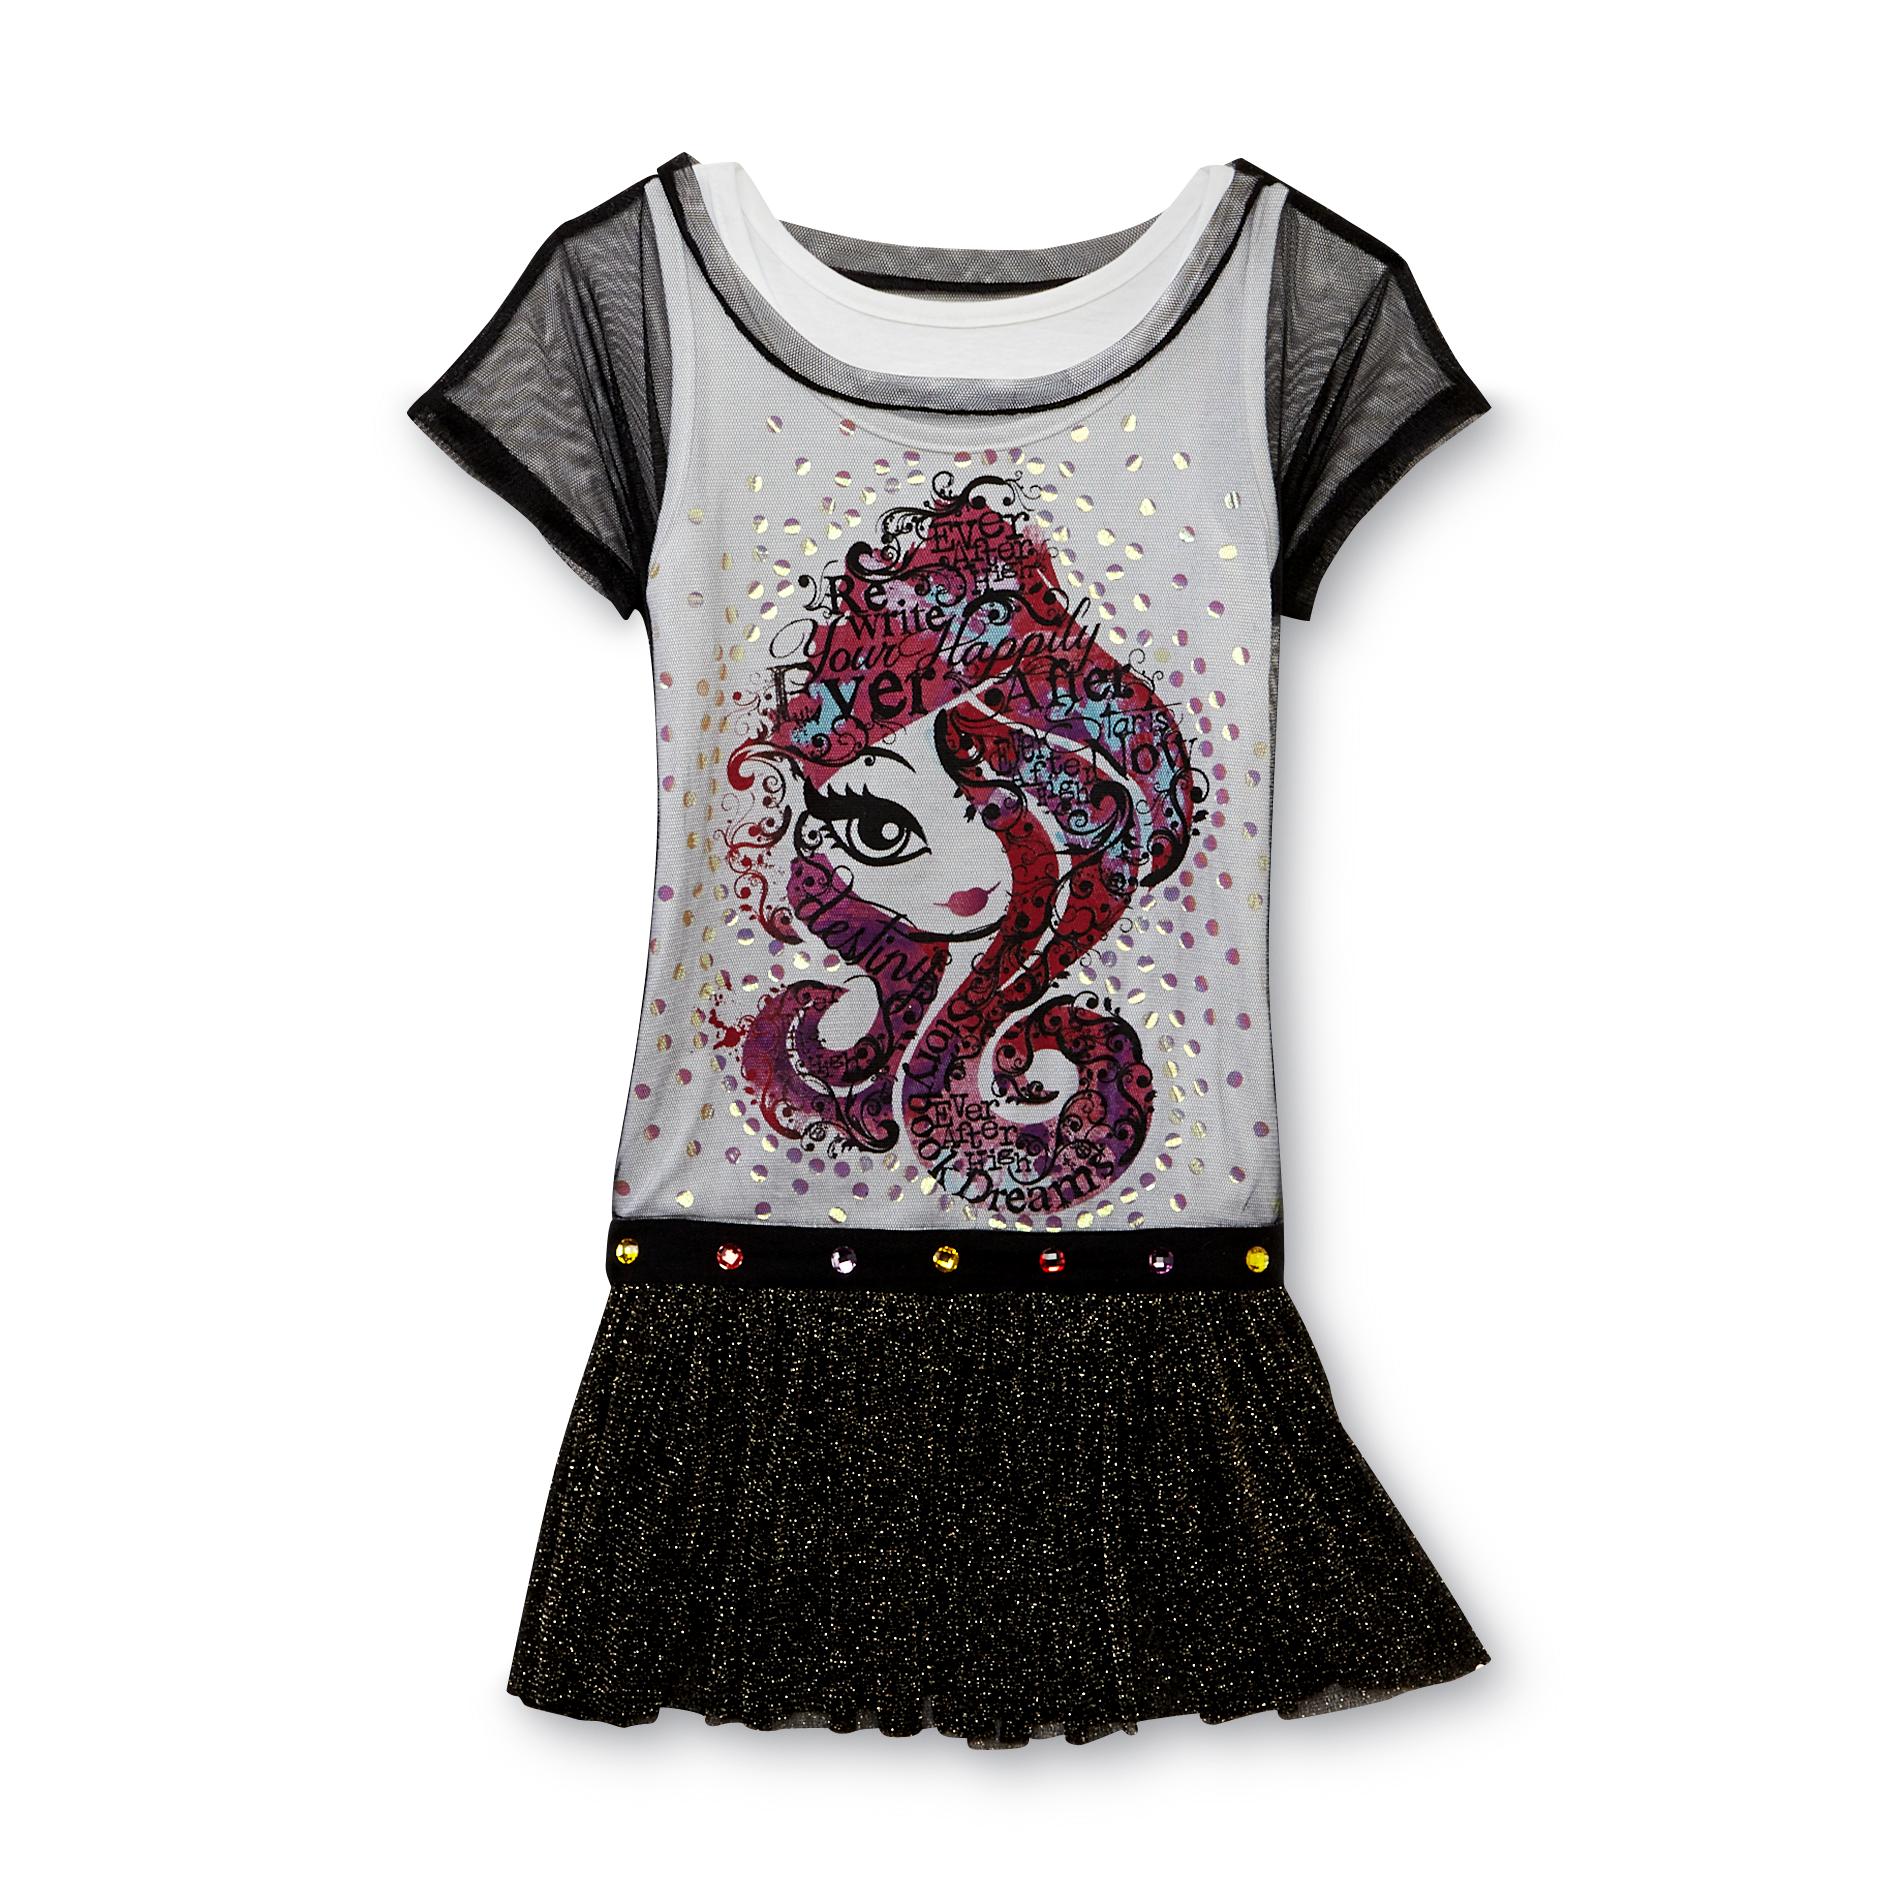 Ever After High Girl's Tunic Top